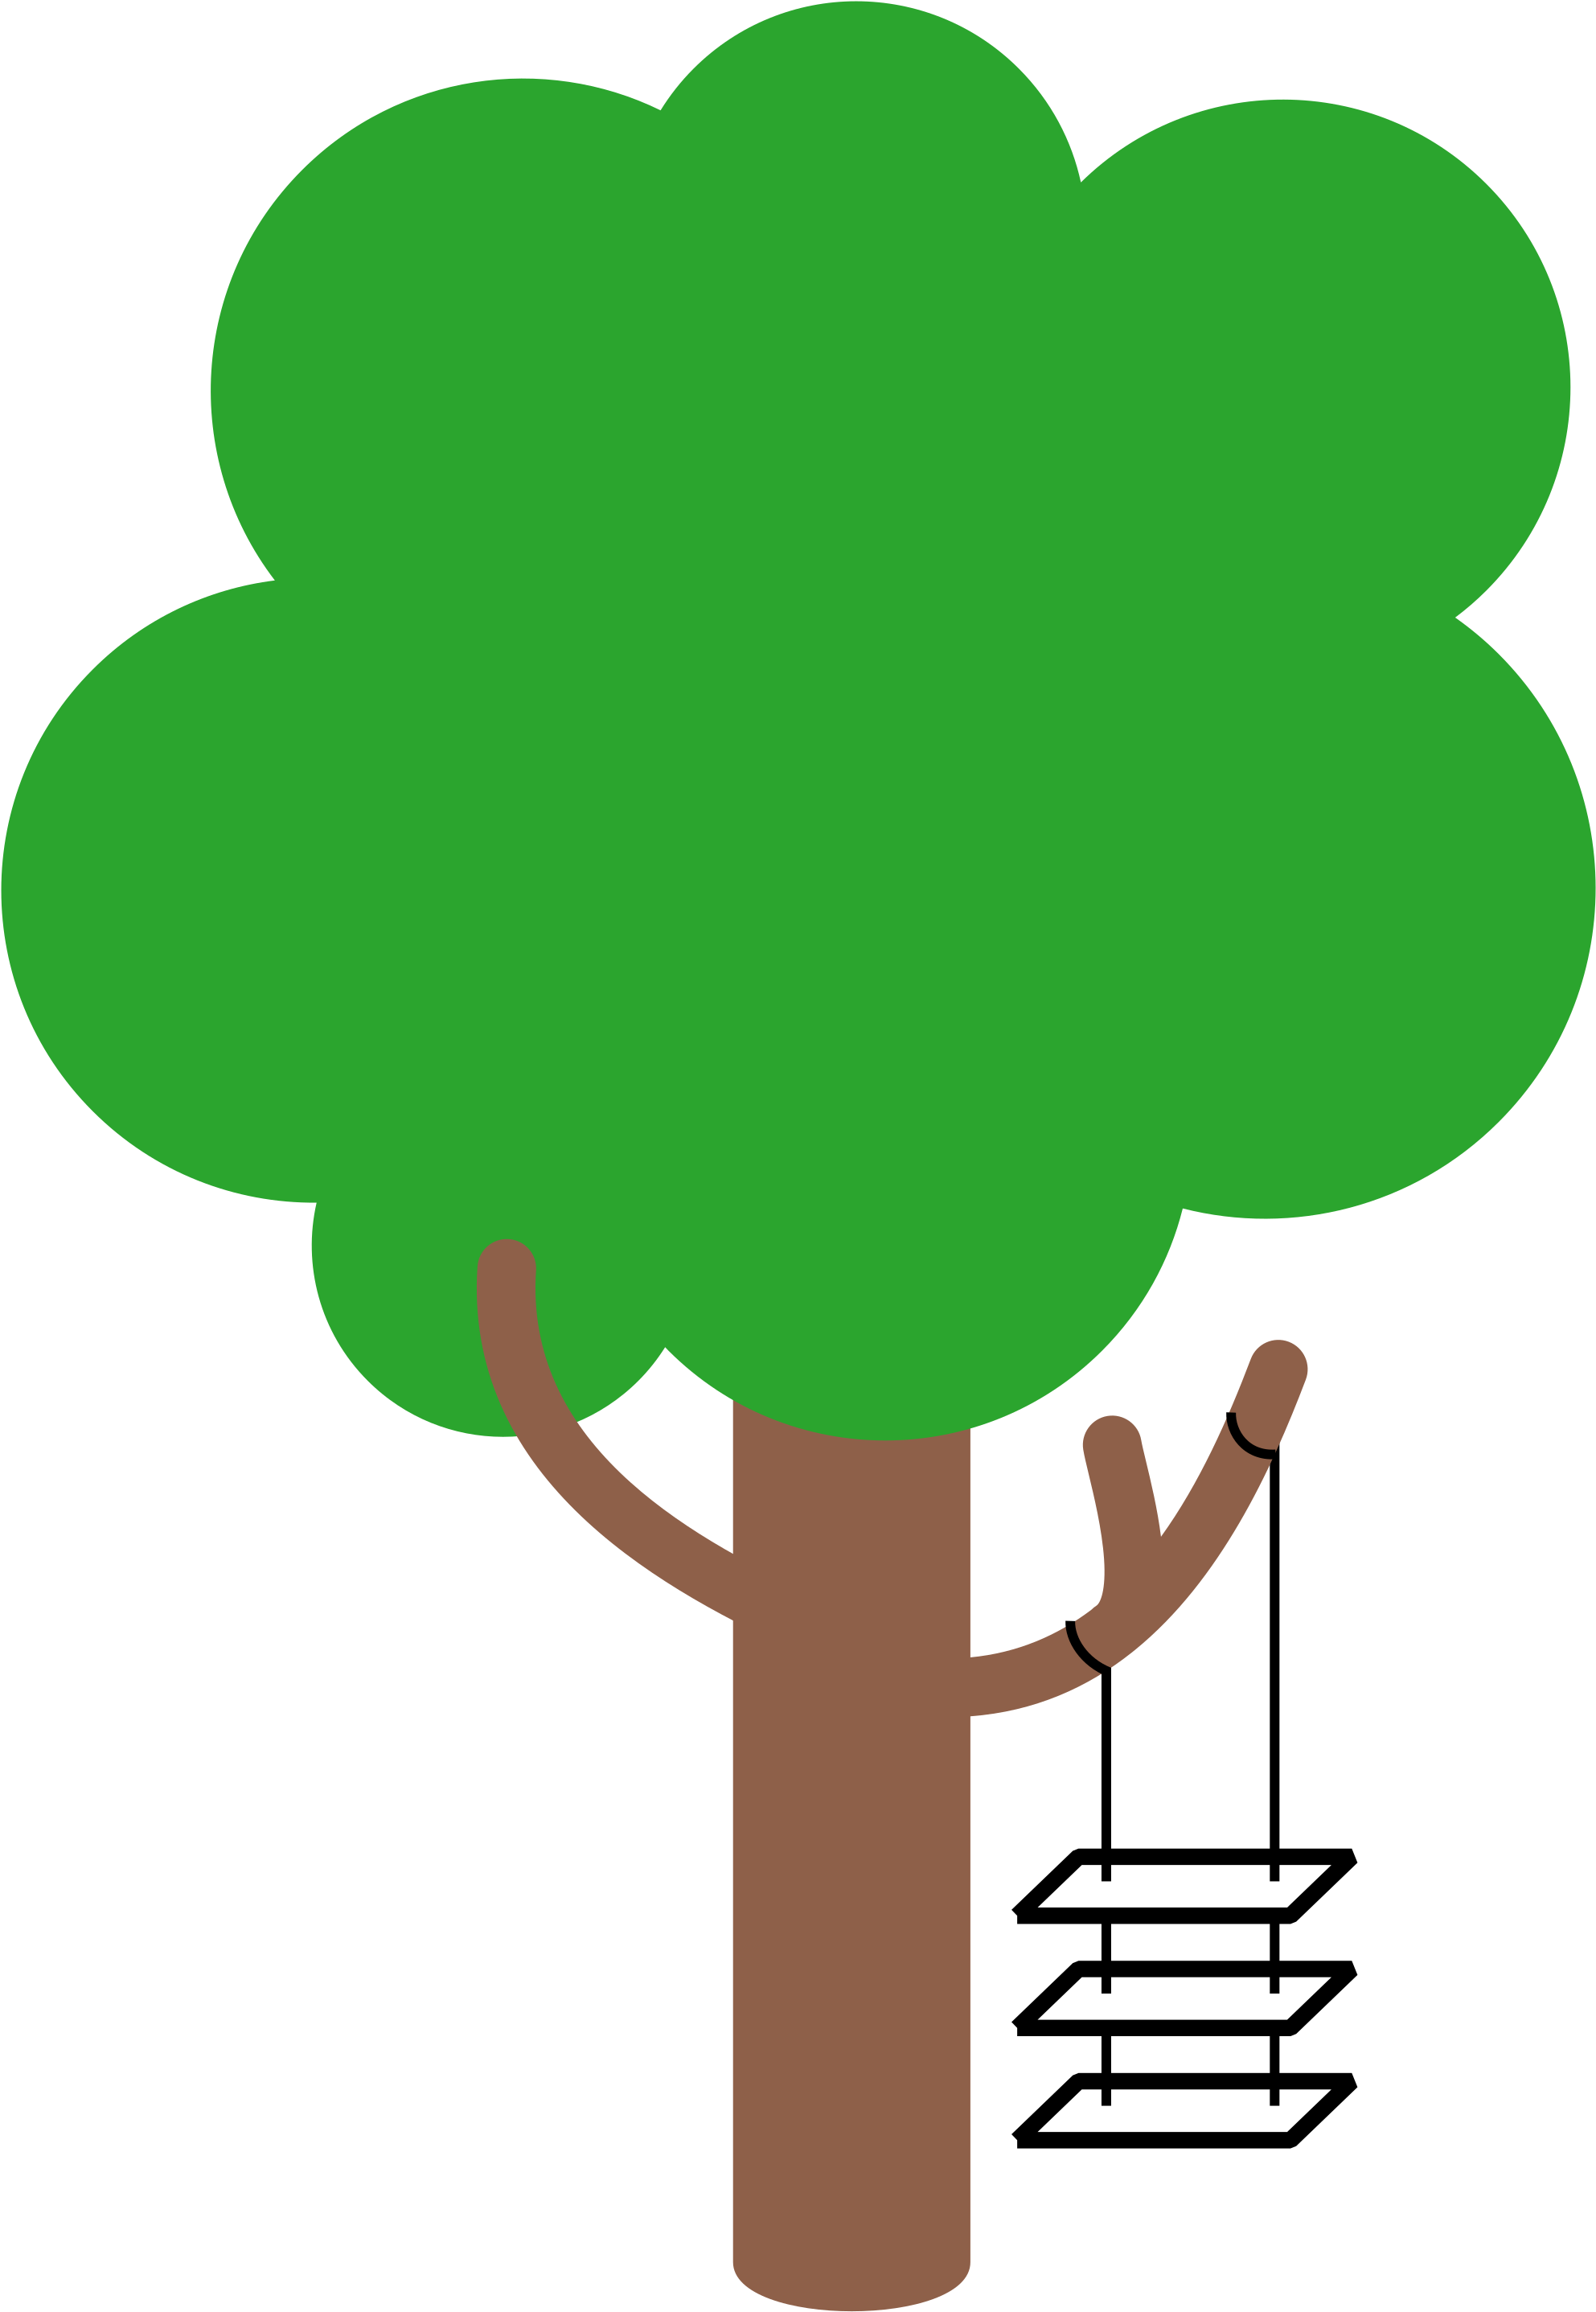 File Tree Colored Svg Wikimedia Commons Open - File Tree Colored Svg Wikimedia Commons Open (2000x2889)